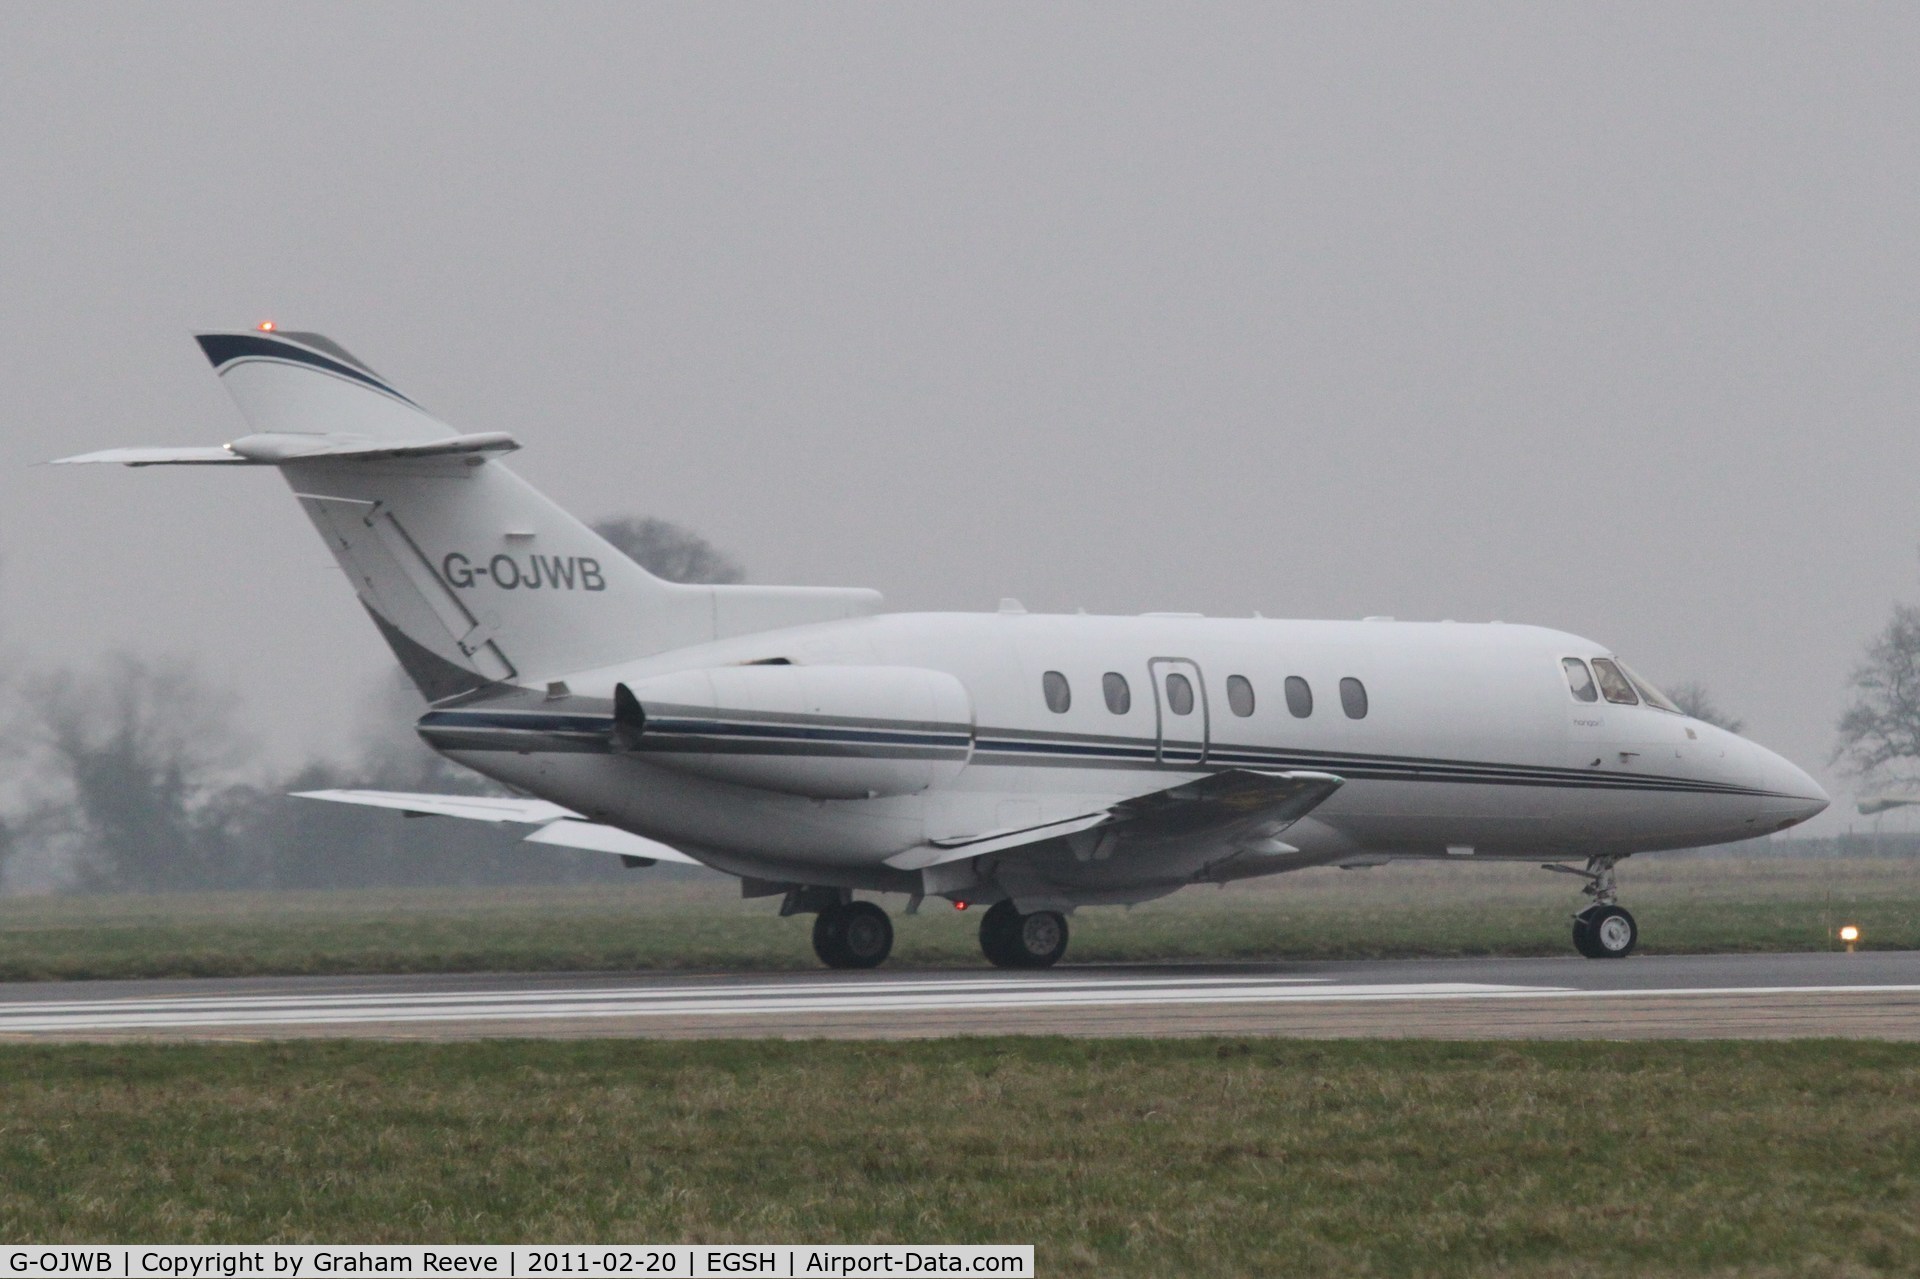 G-OJWB, 2004 Raytheon Hawker 800XP C/N 258674, On the end of the runway and about to depart for Luton.